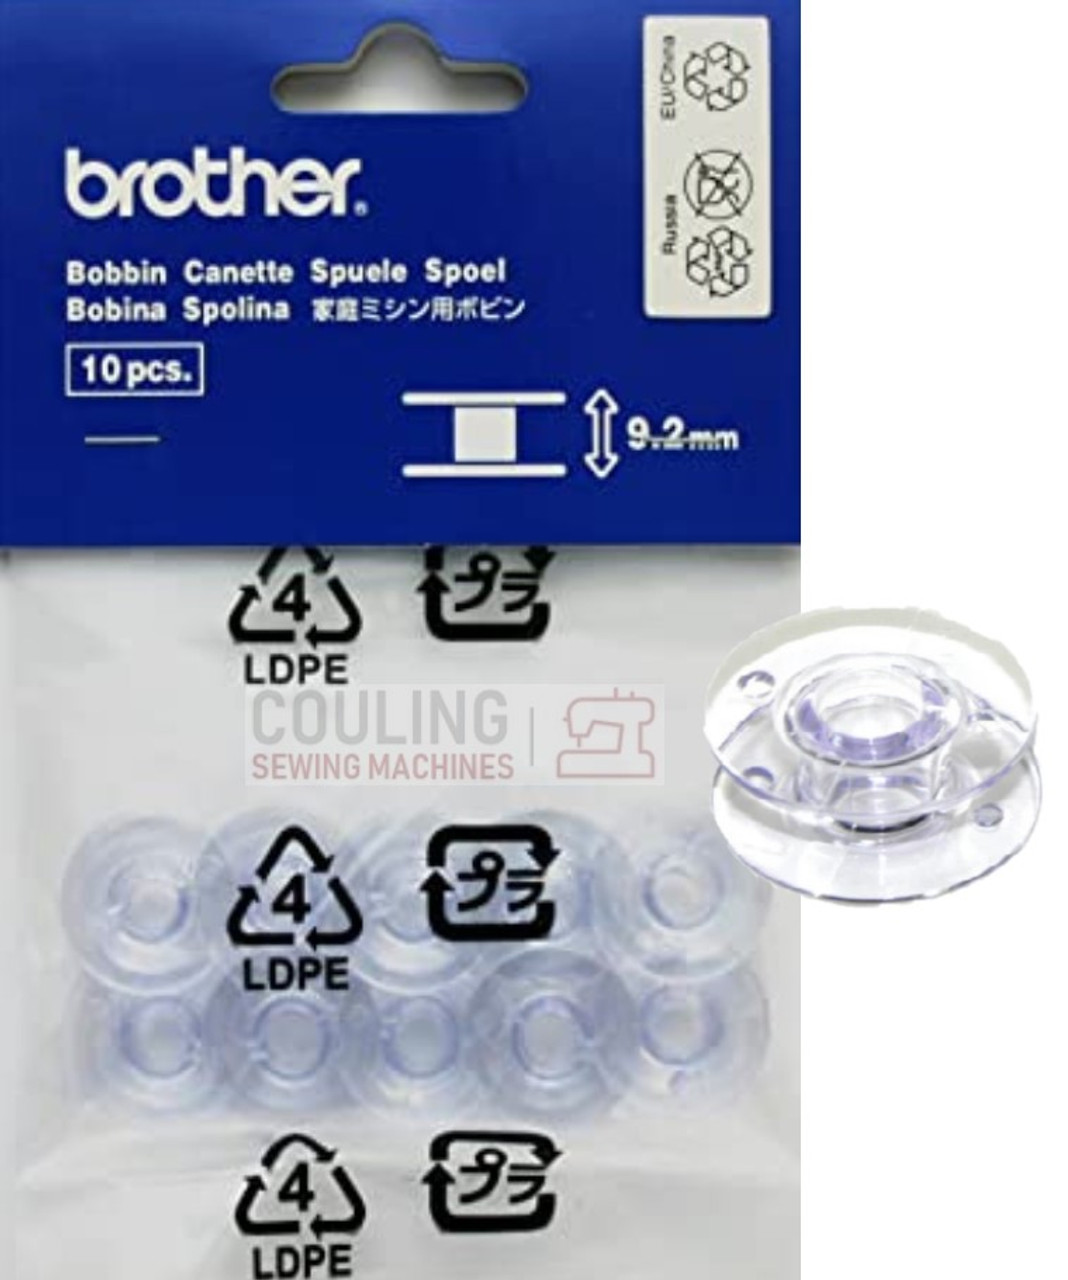 Brother Domestic Bobbins 11.5mm (SFB) - Brother - Brother Machines